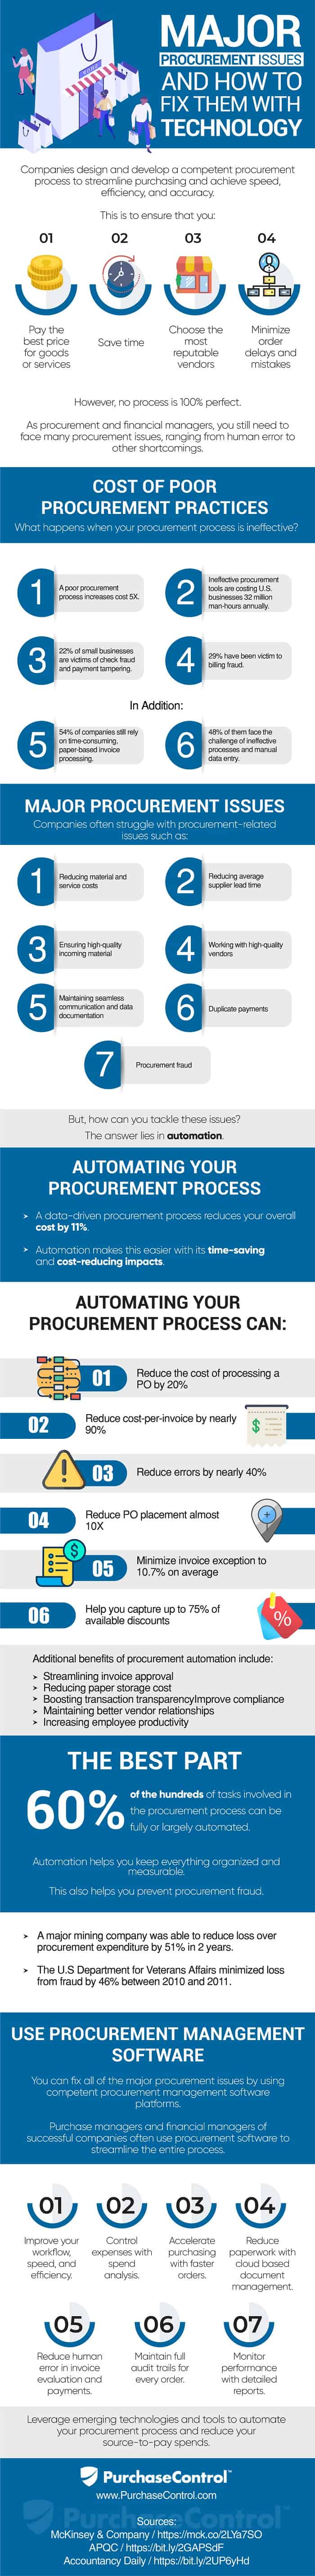 major procurement issues - how to fix them with technology